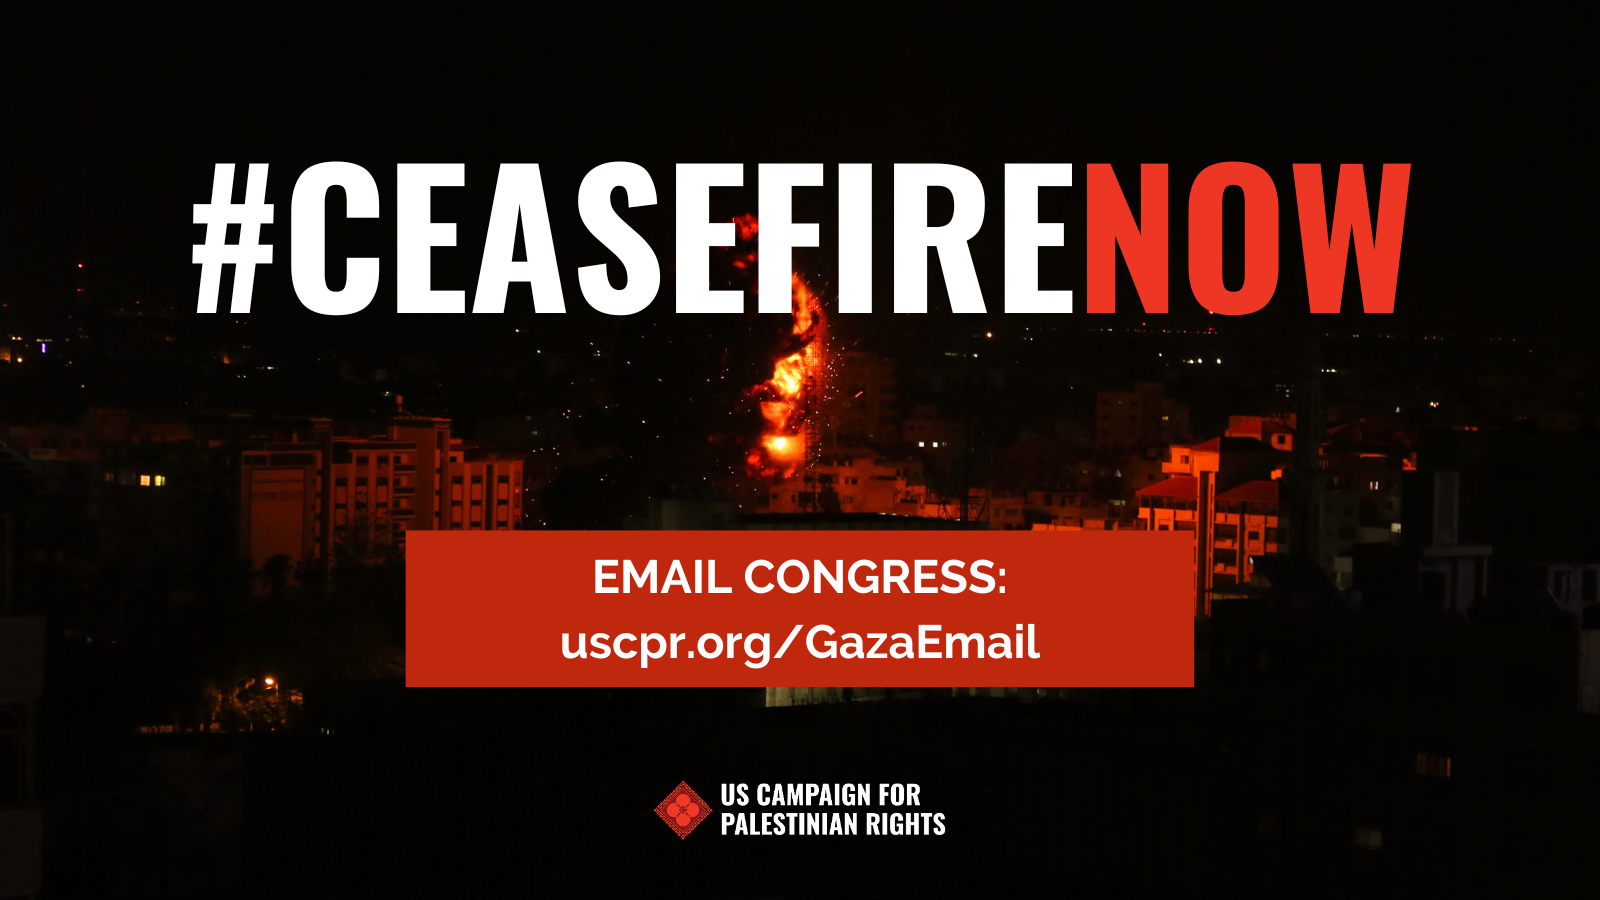 #CeasefireNOW hashtag over photo of Gaza being bombed. Email Congress: uscpr.org/GazaEmail